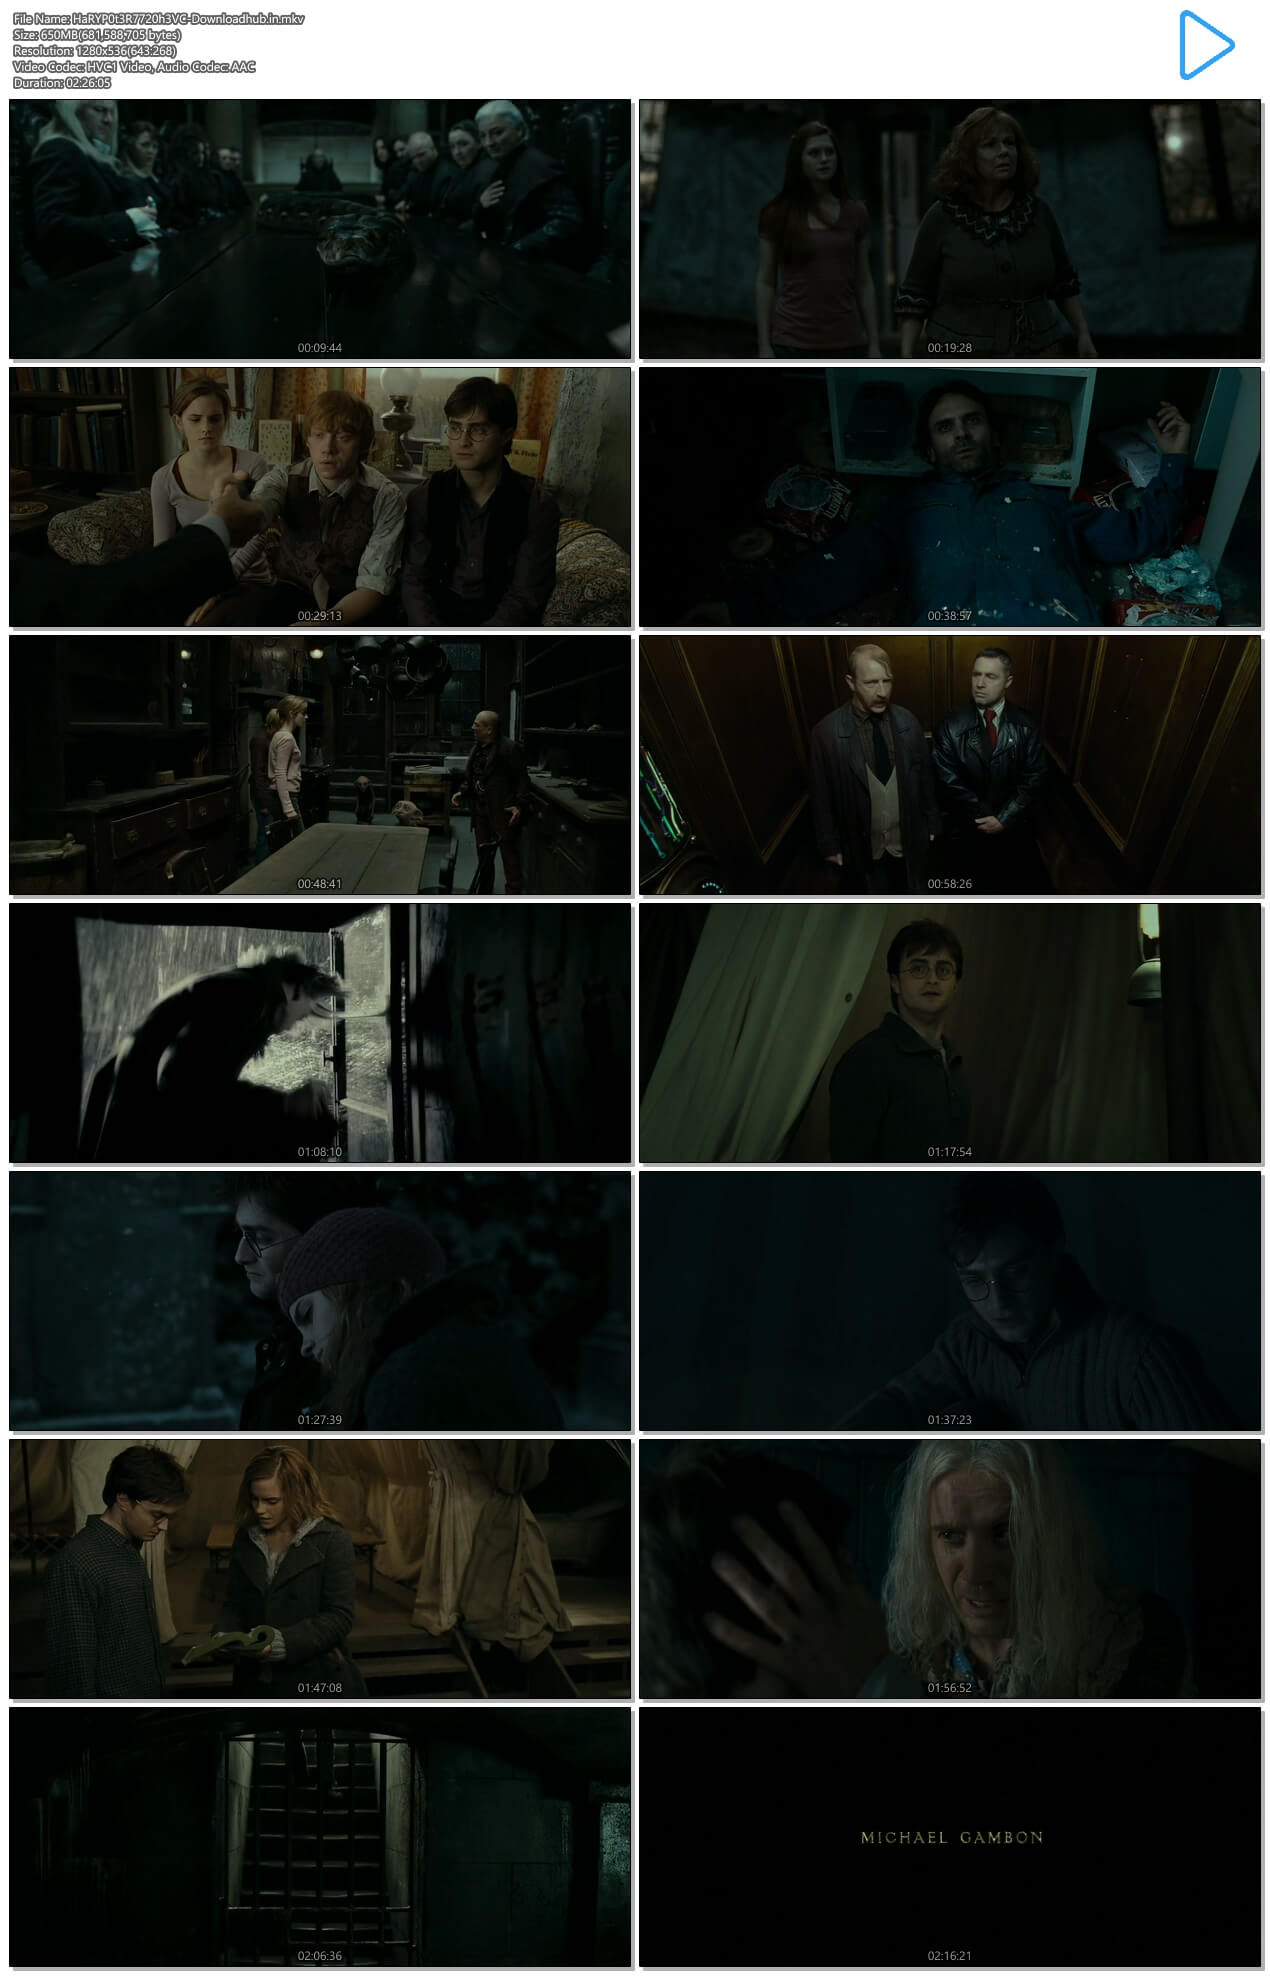 harry potter and deathly hallows part 1 360 kbps dual audio